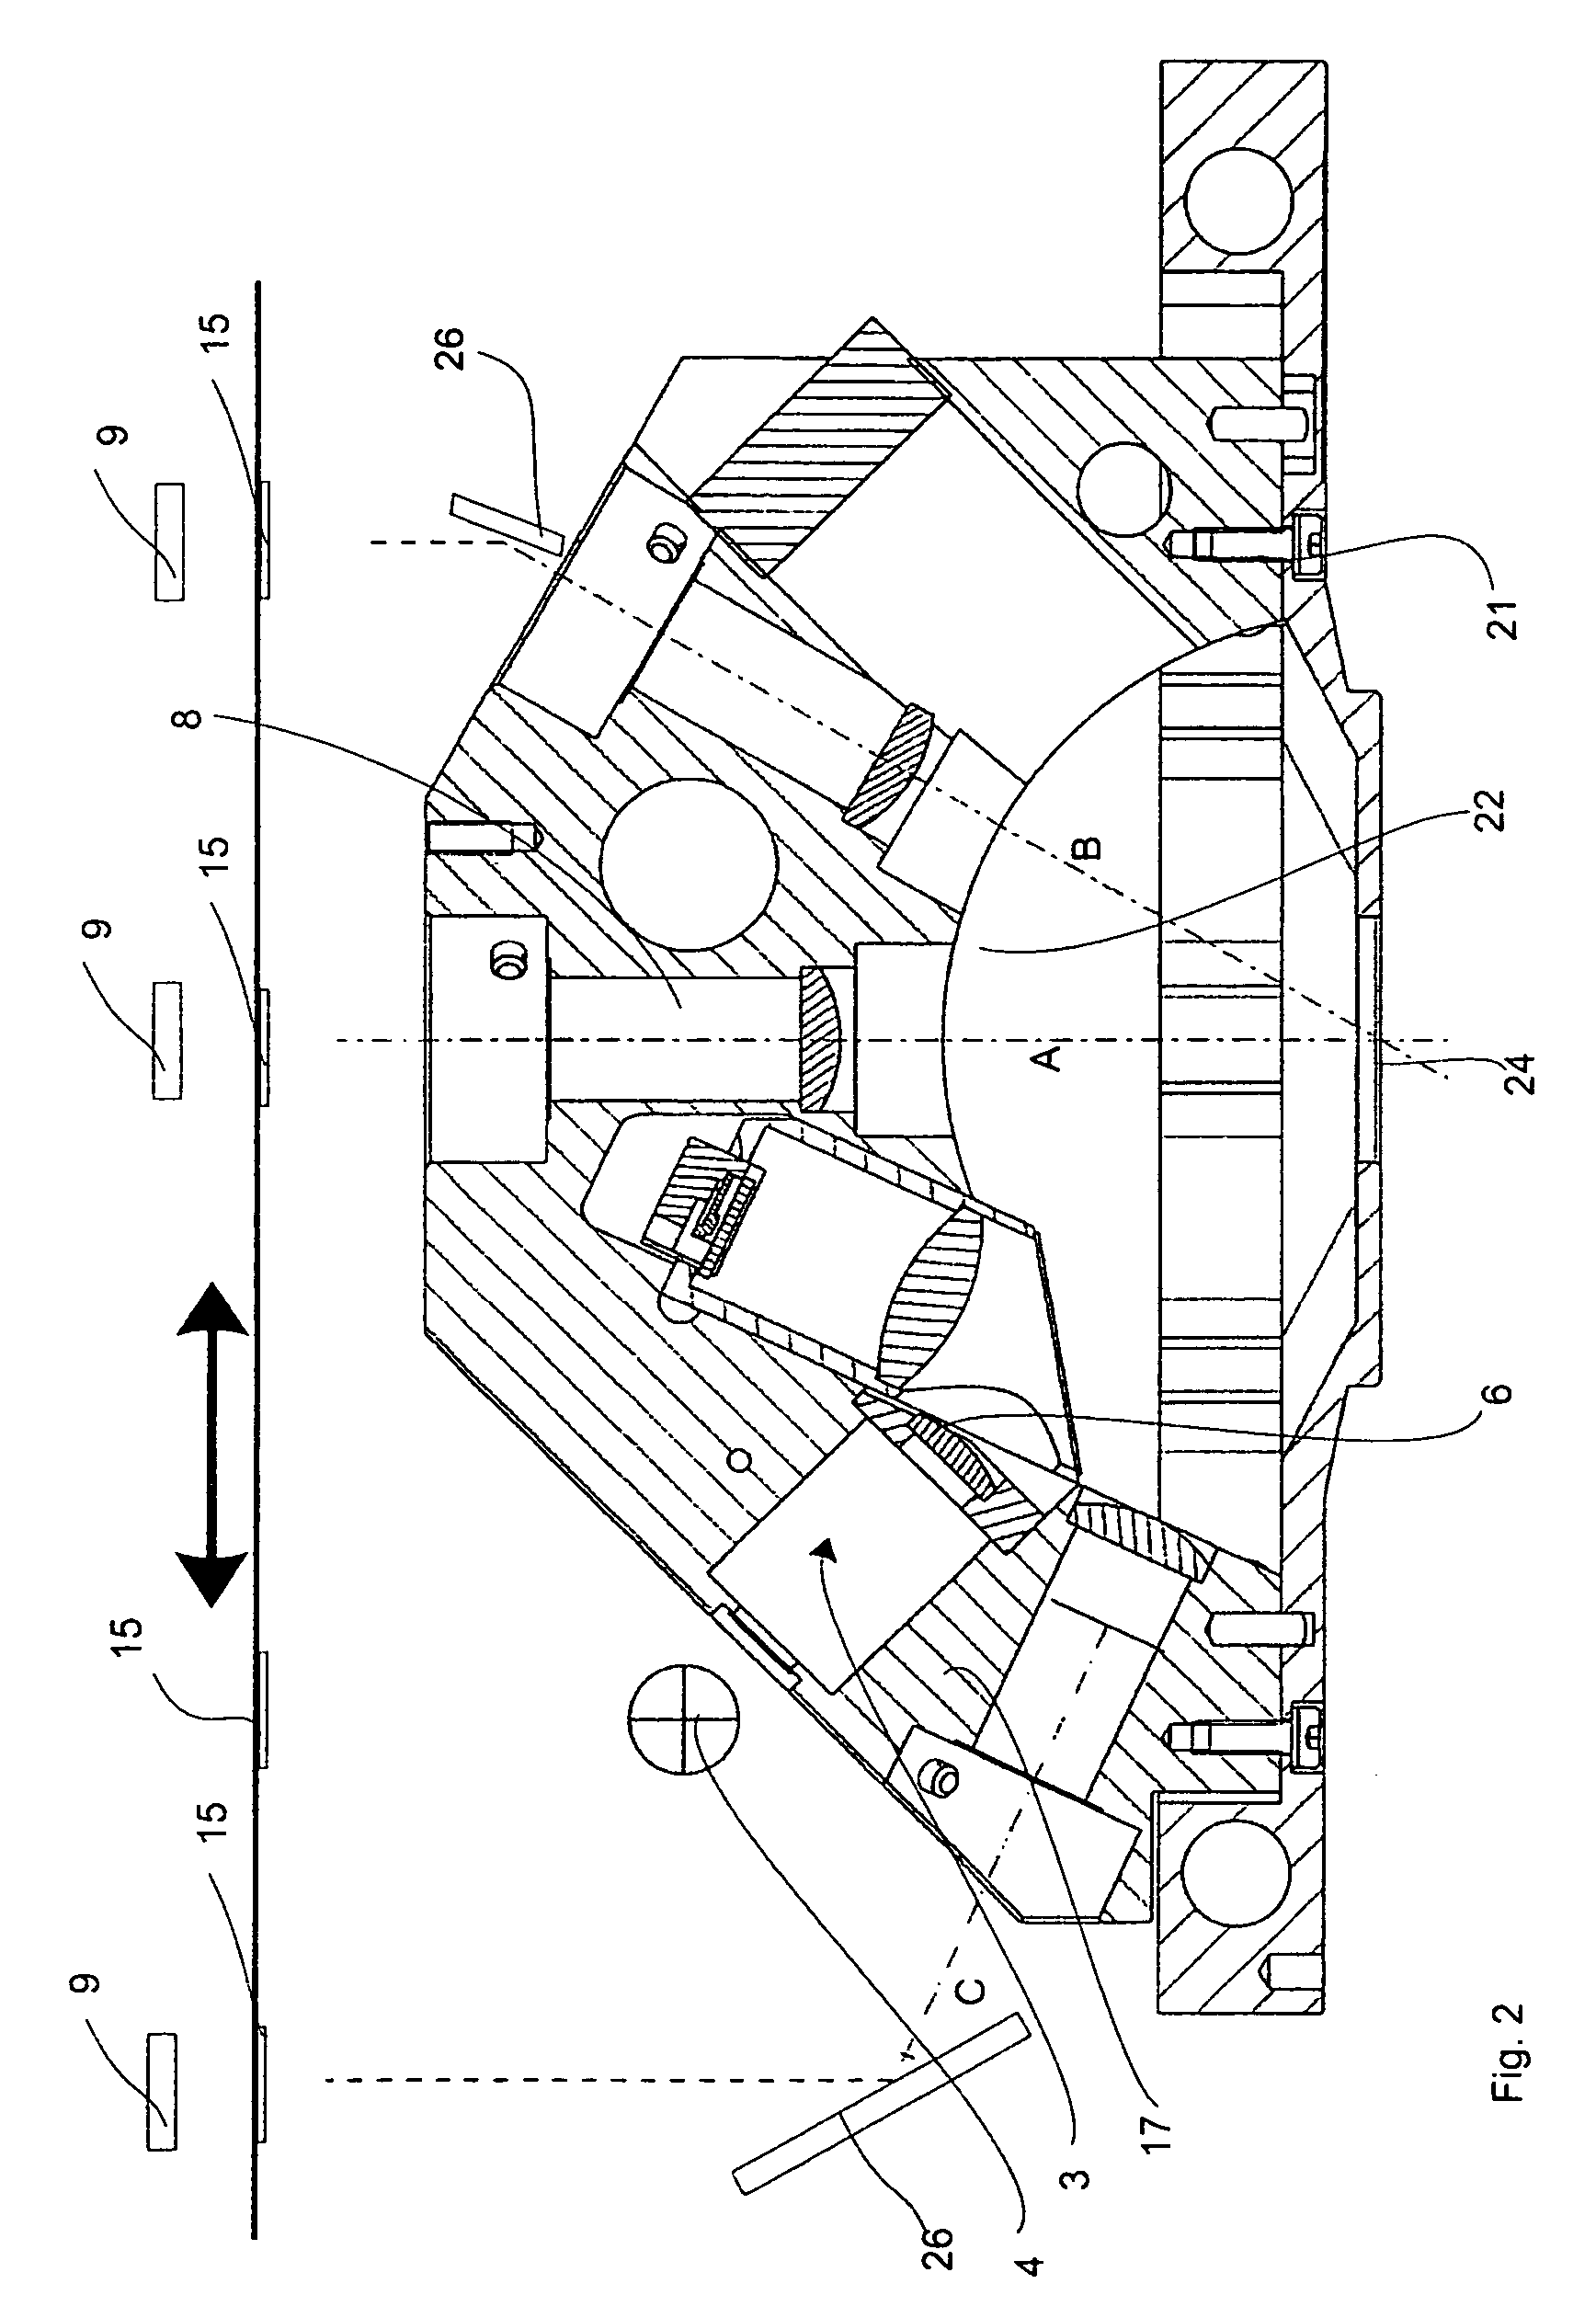 Apparatus for the determination of surface properties